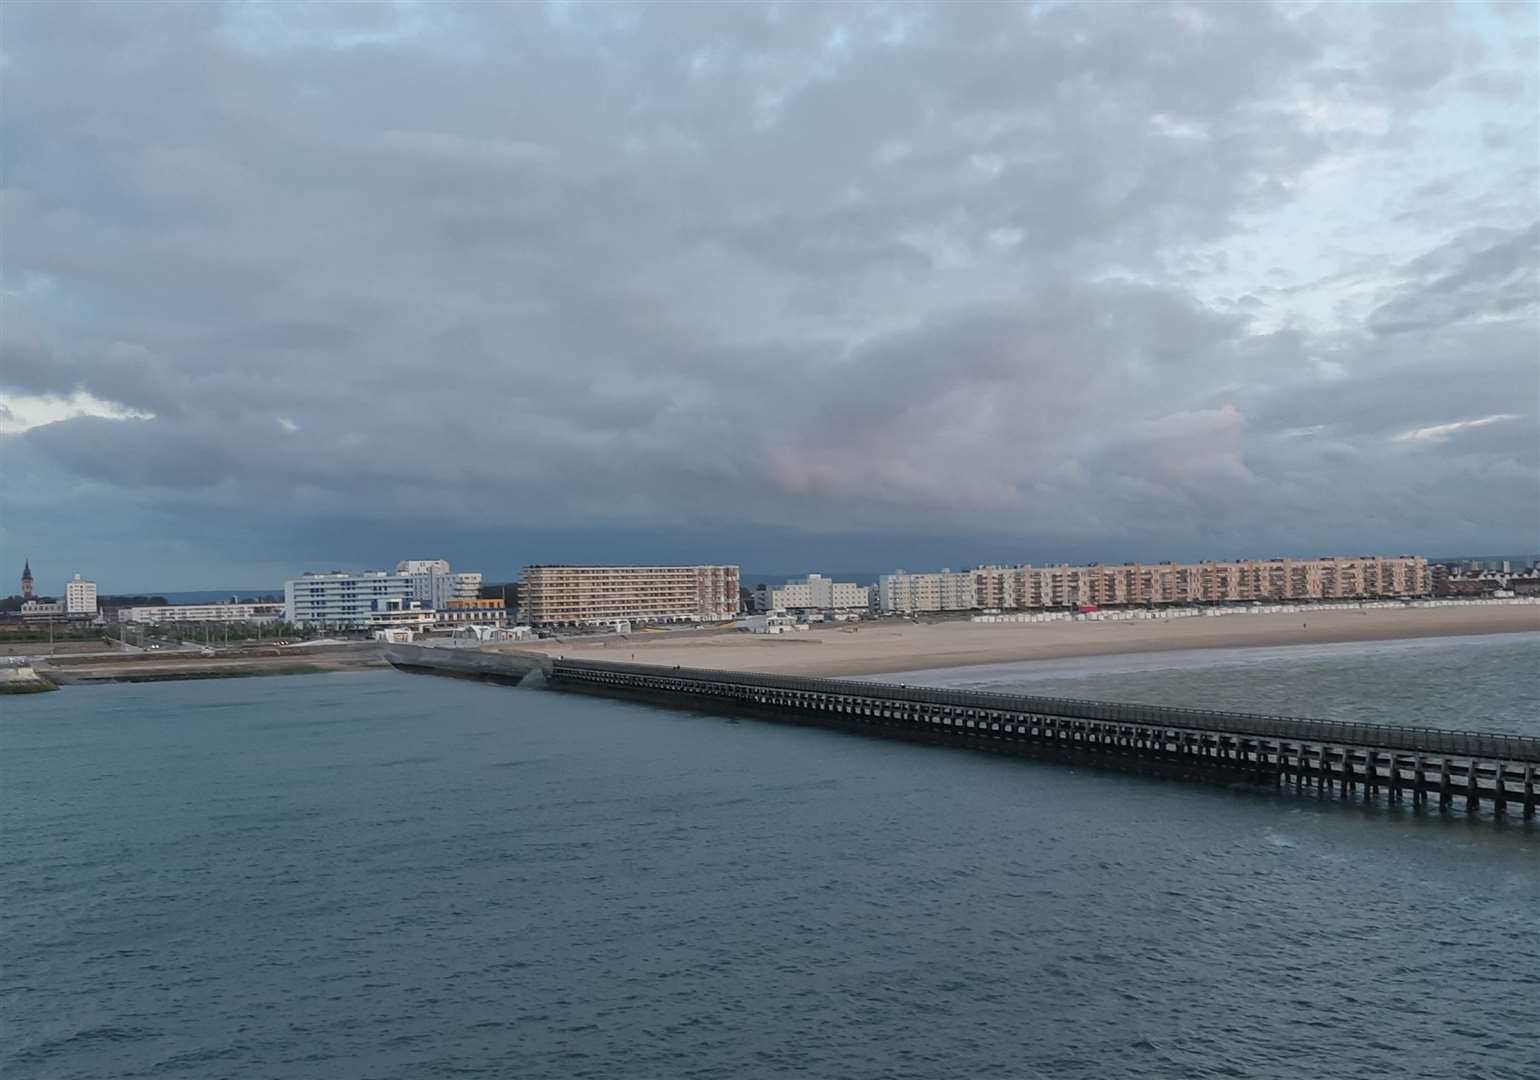 Some migrants were stopped and brought back to France: View of Calais. Picture: Sam Lennon